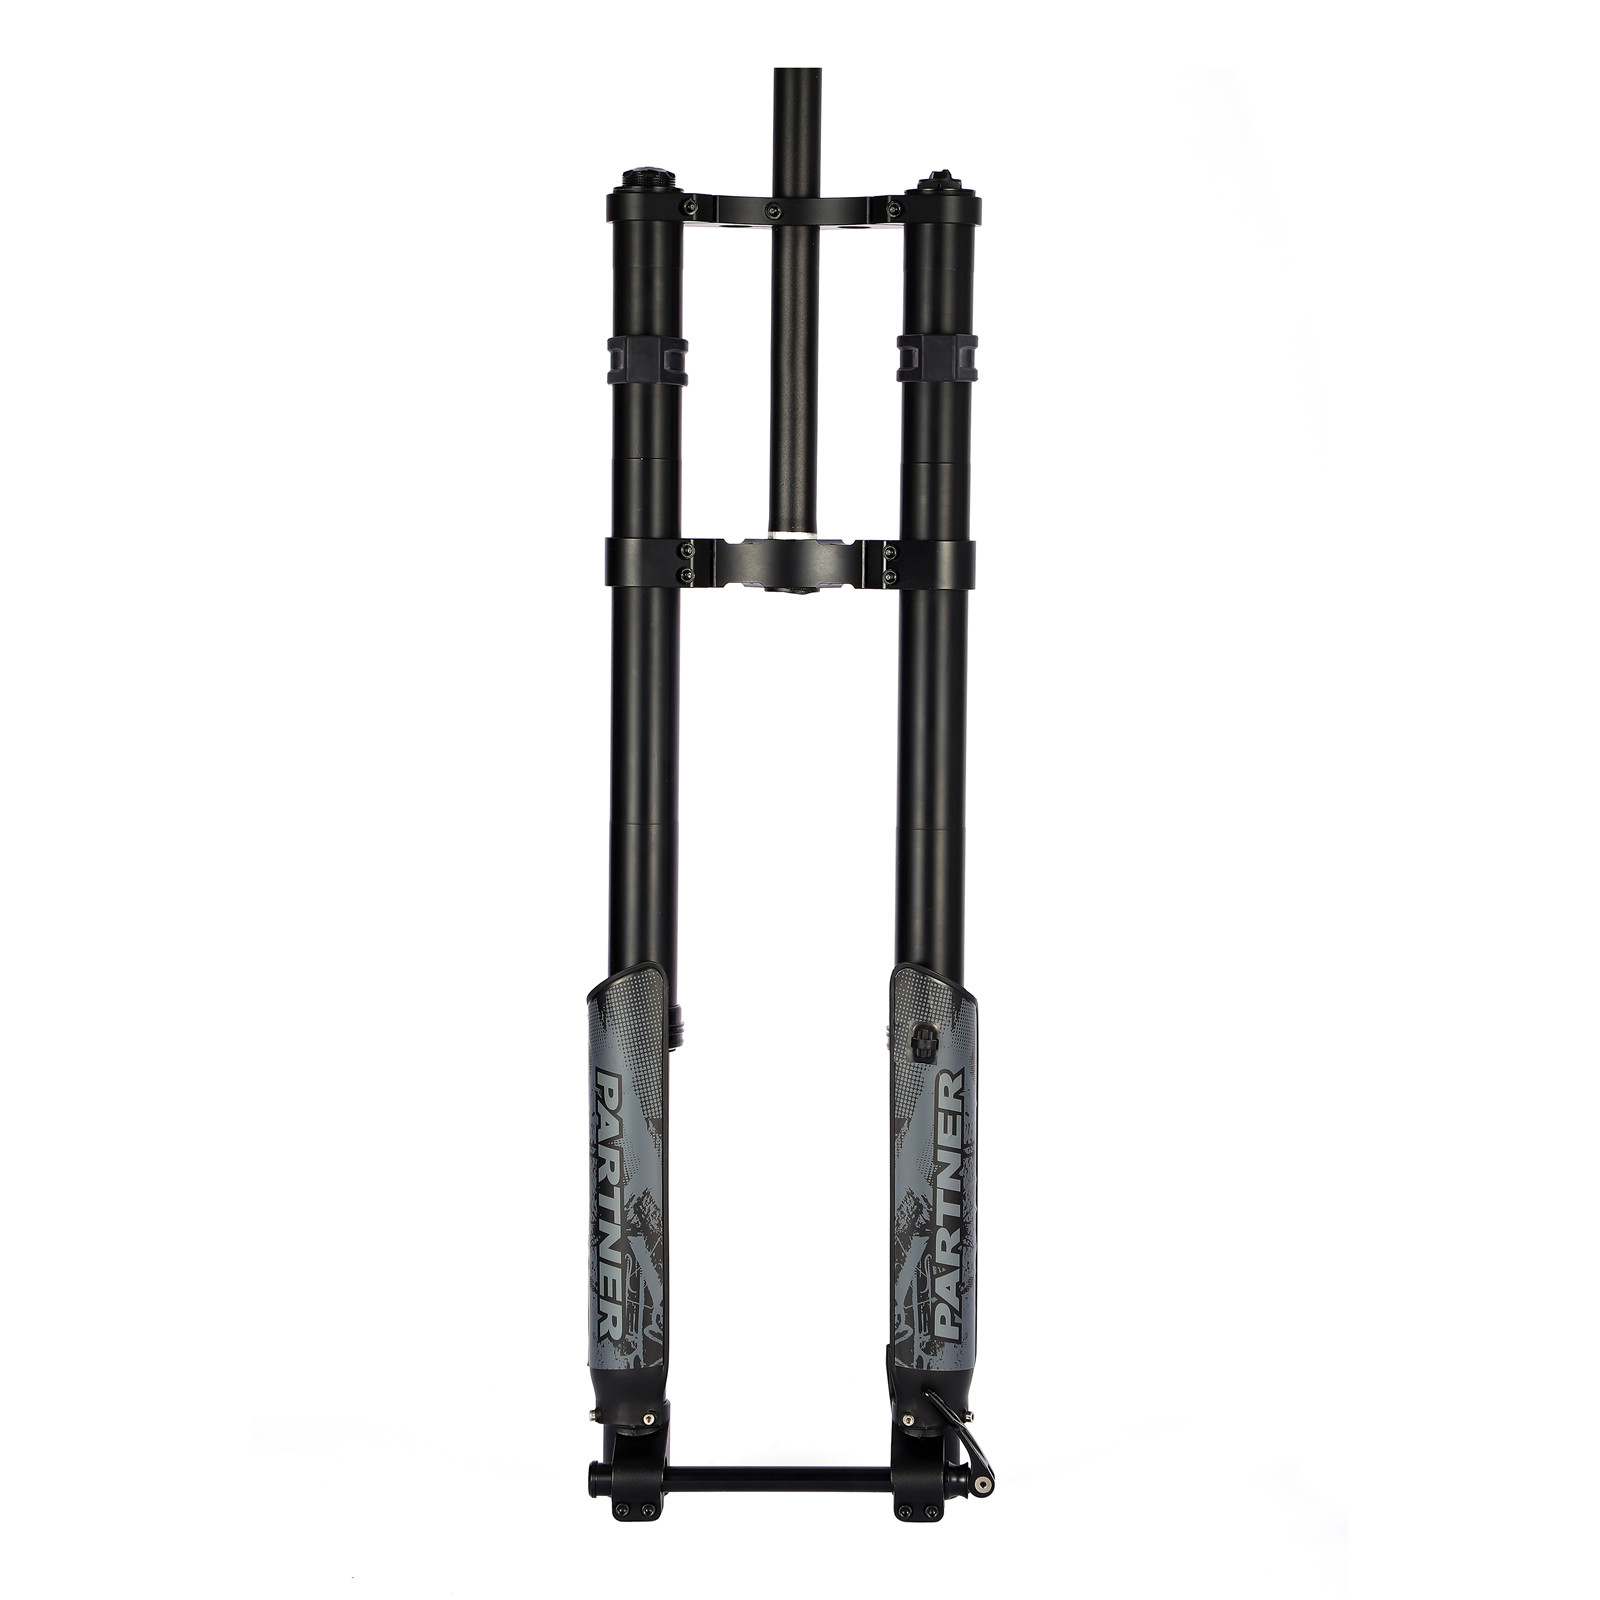 Show Bike Fork – 916DH Featured Image